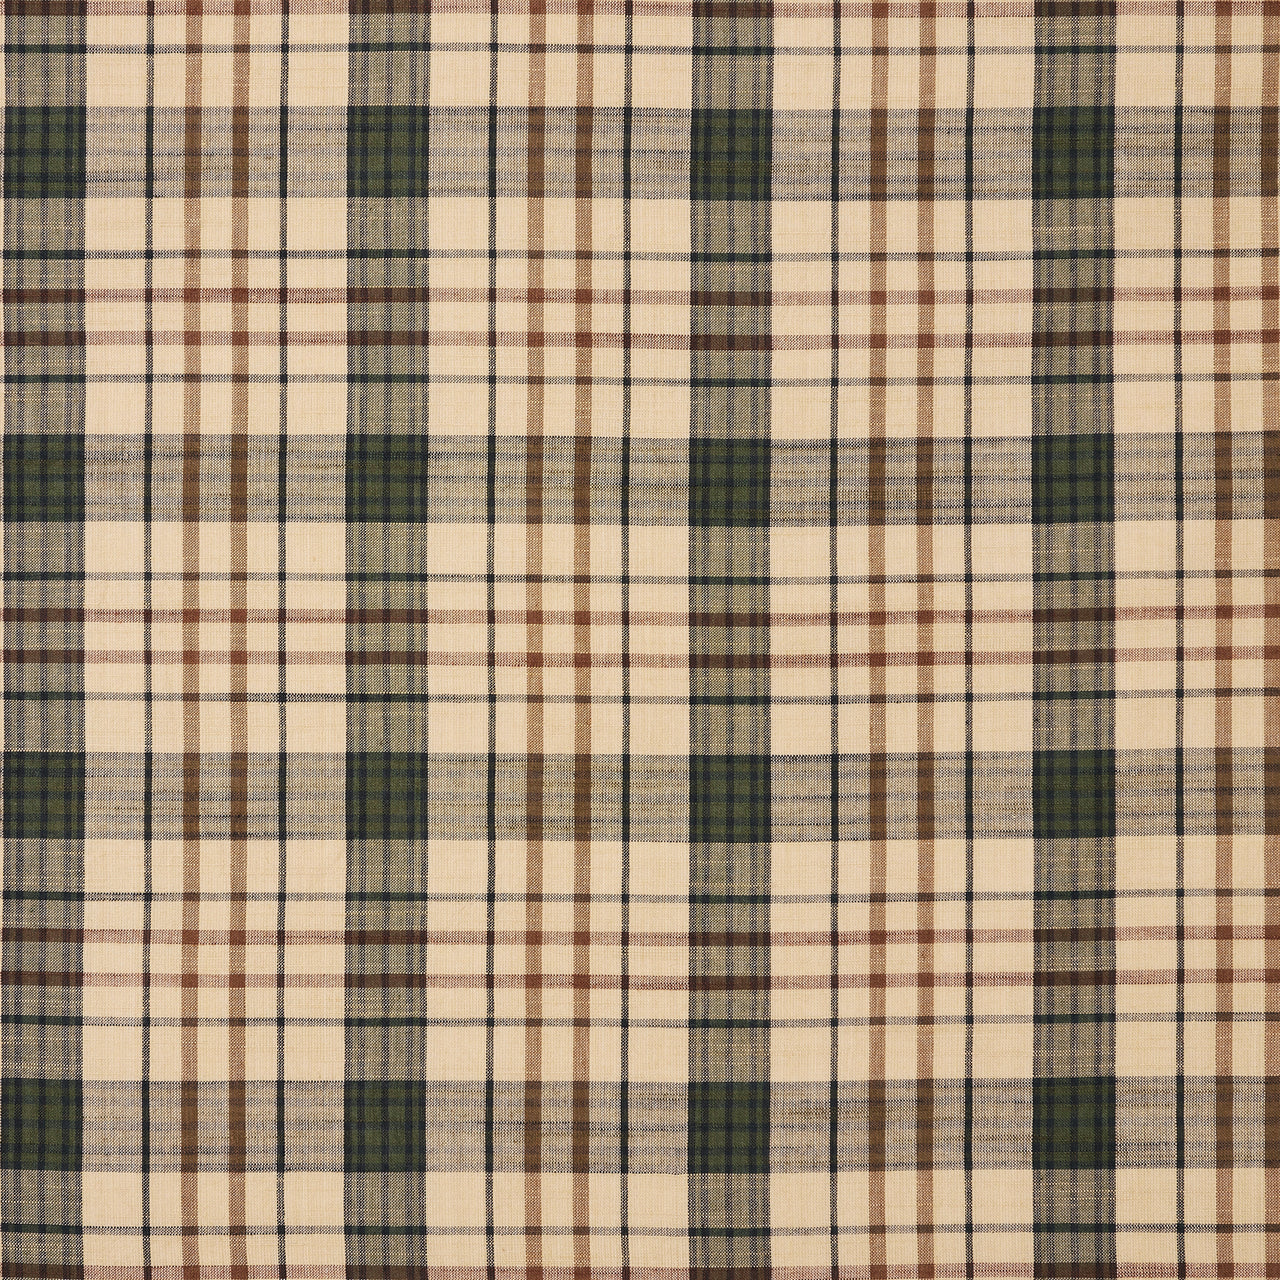 Cider Mill Plaid Short Panel Curtain Set of 2 63x36 VHC Brands